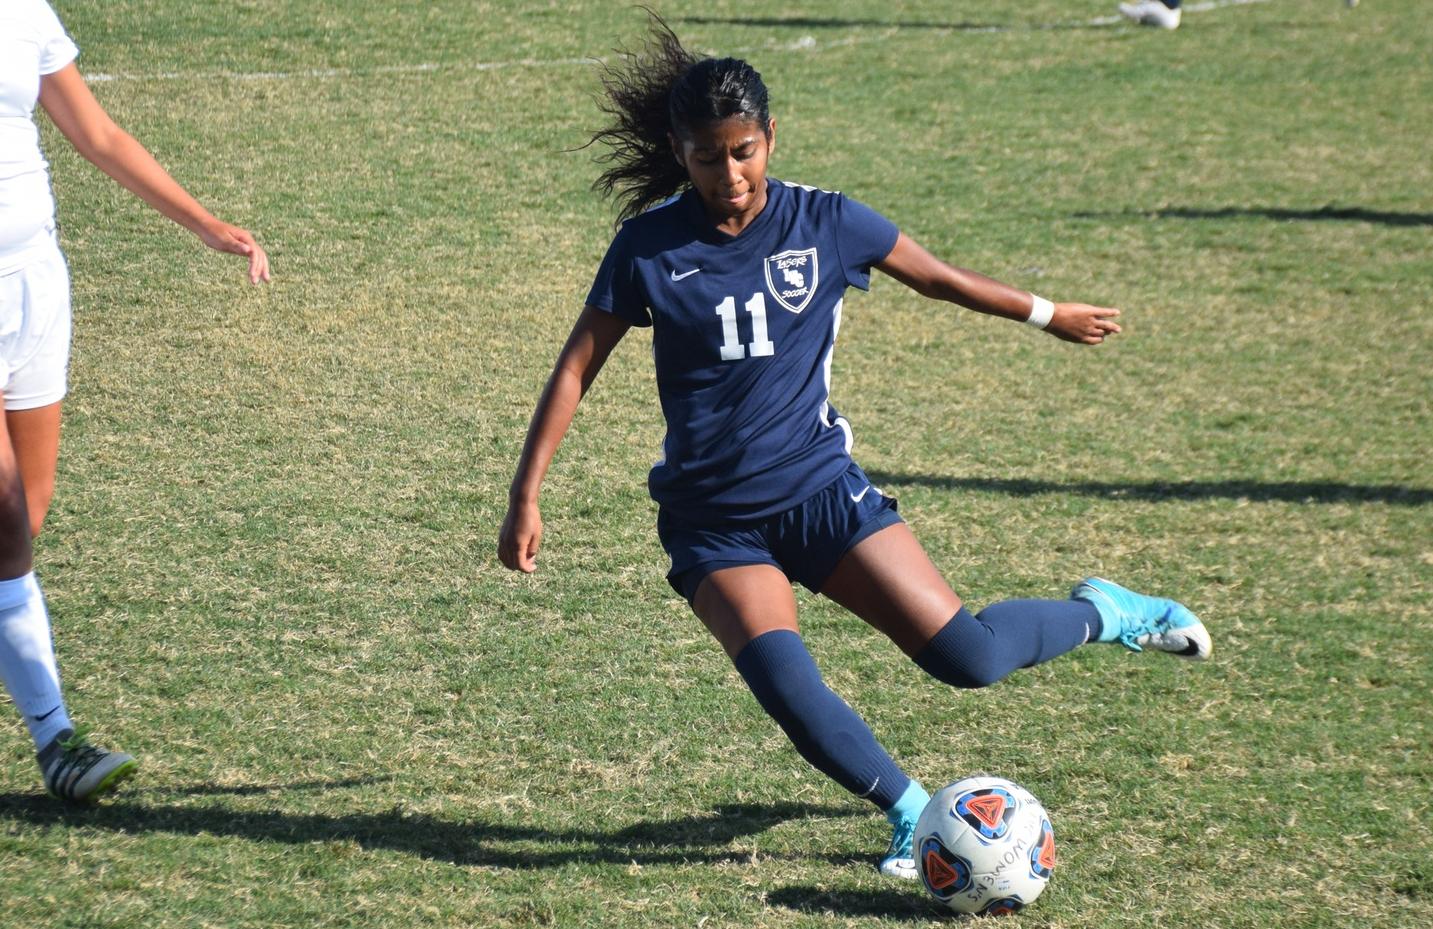 Women's soccer team runs out of time, falls to Fullerton